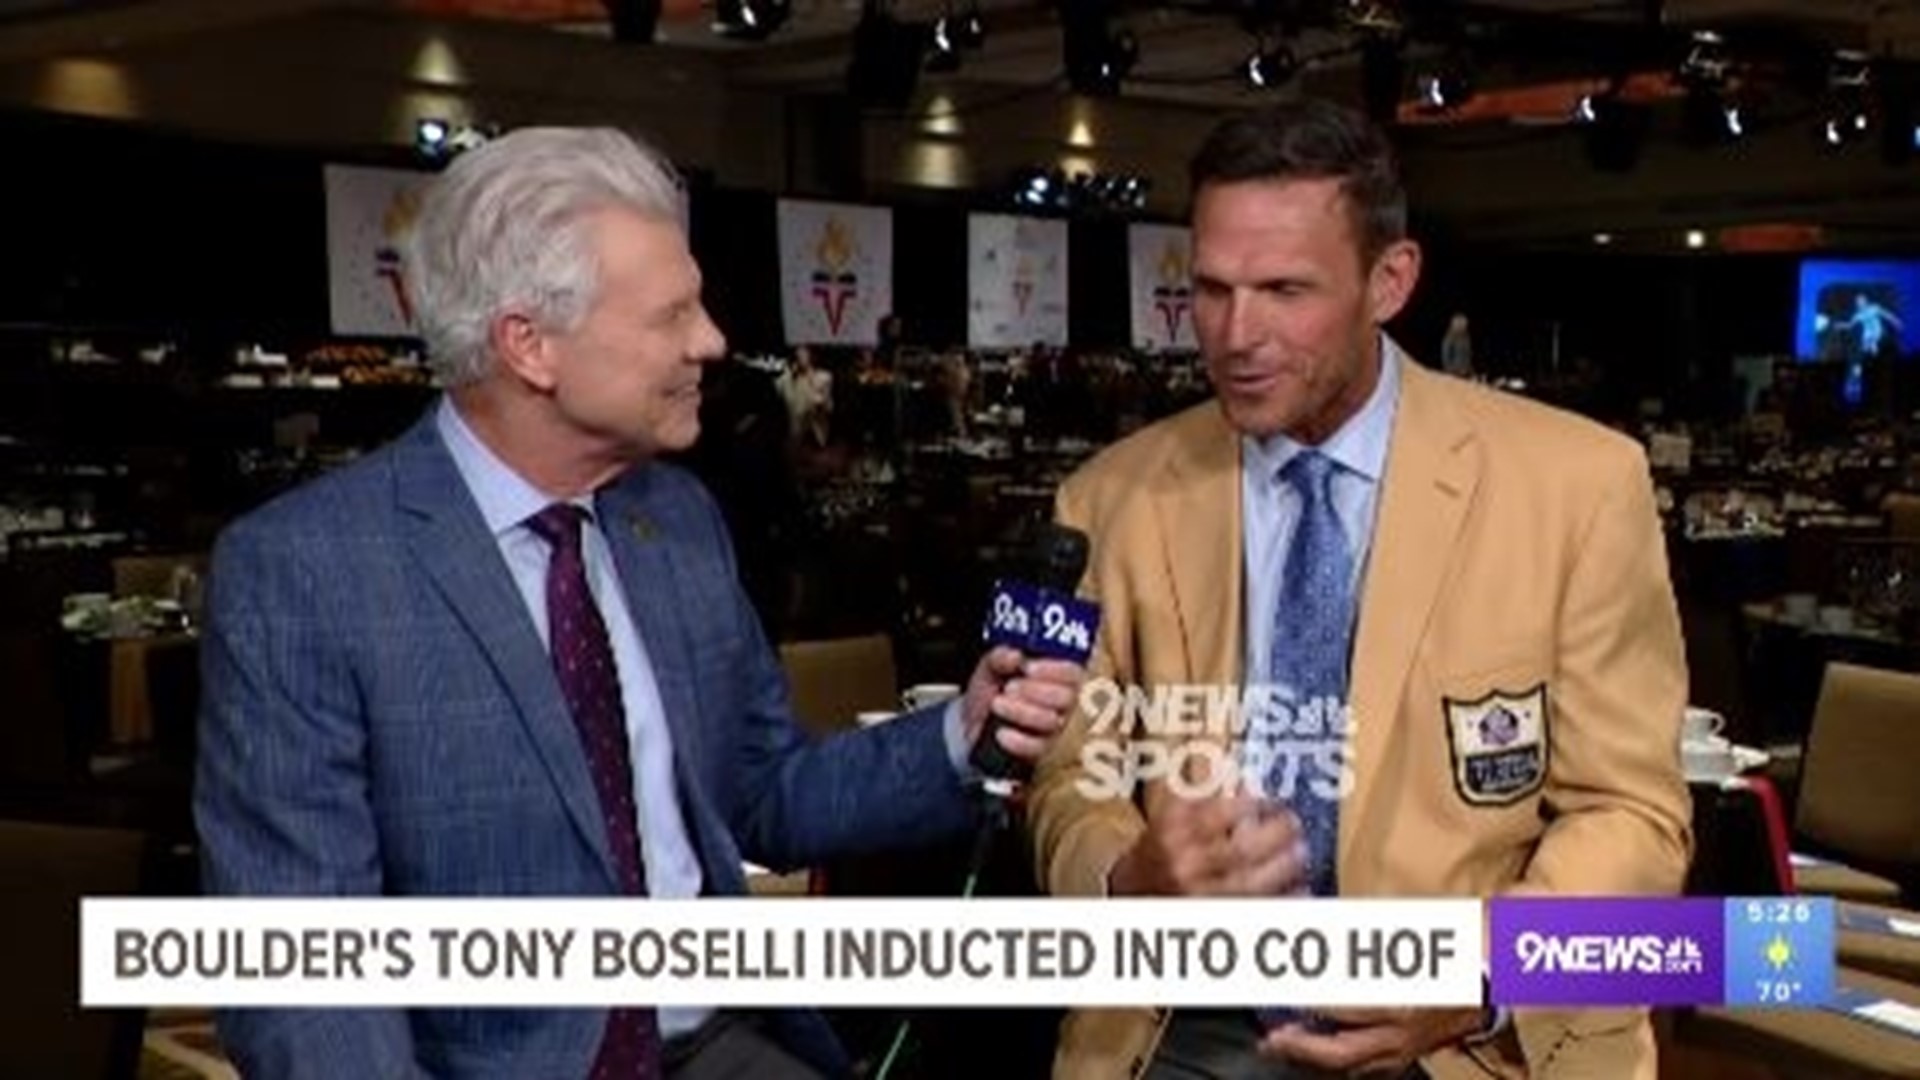 A Fairview high school legend and Pro Football Hall-of-Famer, Tony Boselli sat down with 9NEWS' Mike Klis to share the honor of being inducted into the CSHOF